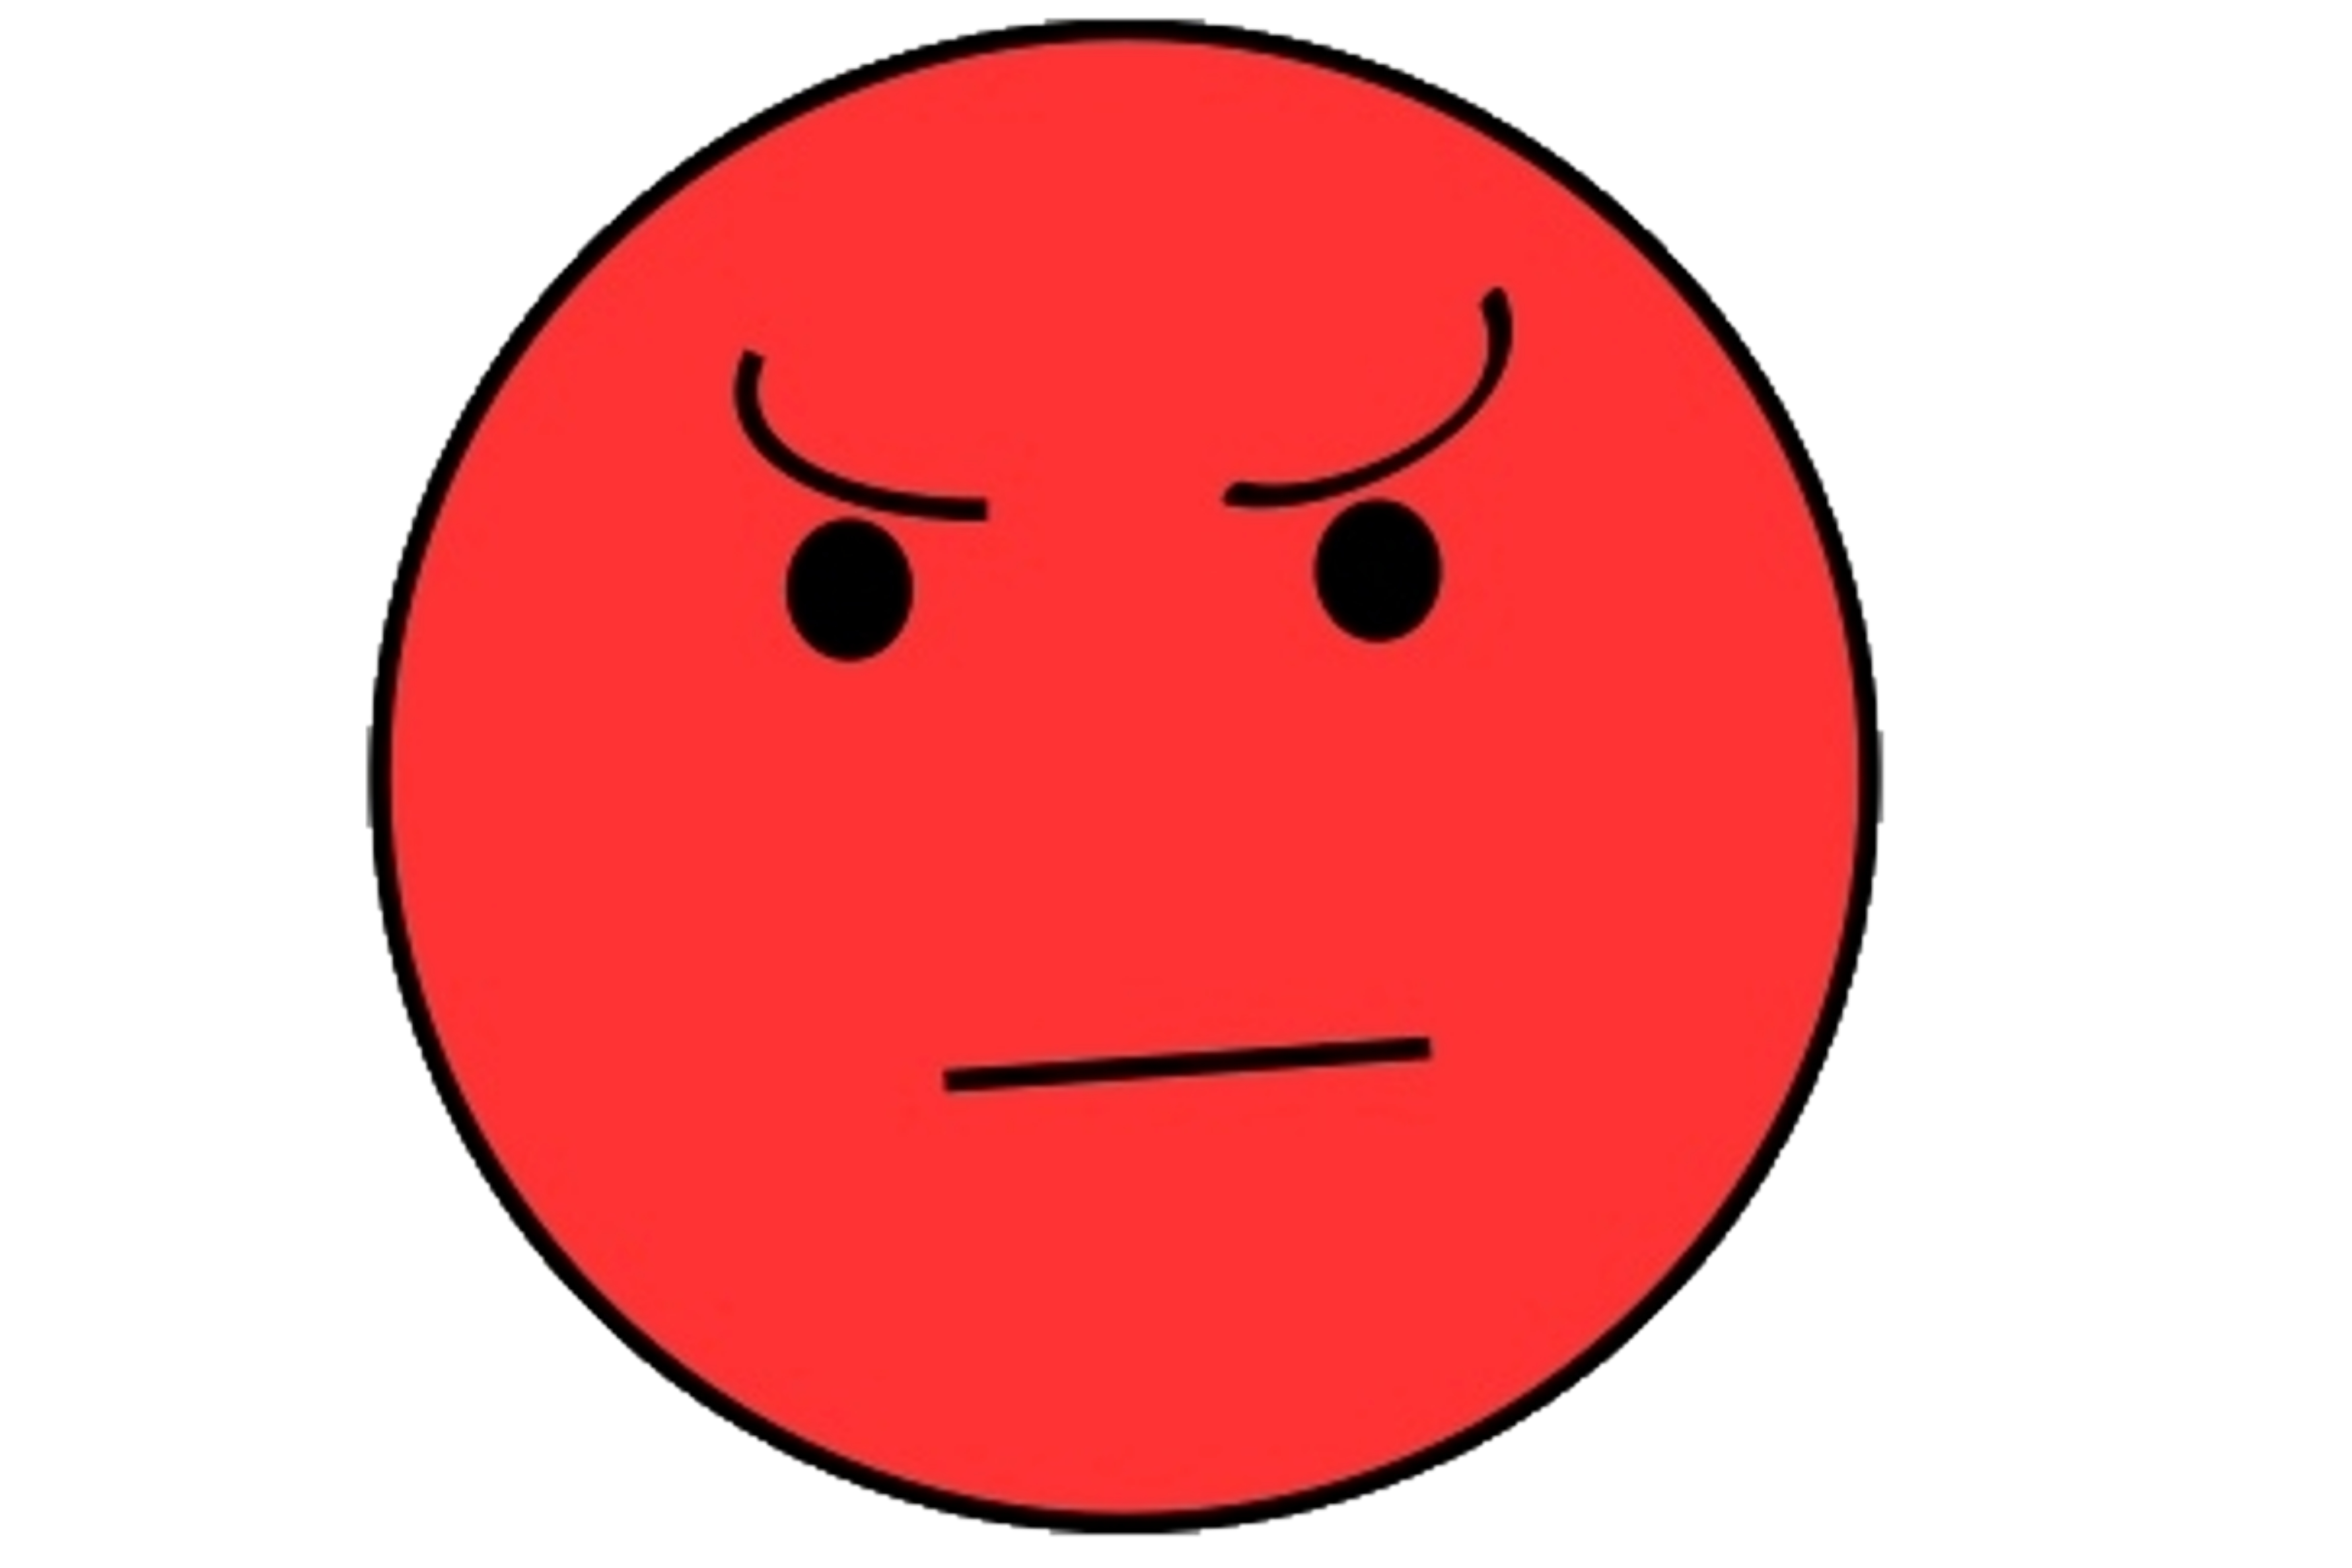 Angry And Unhappy Faces Clipart